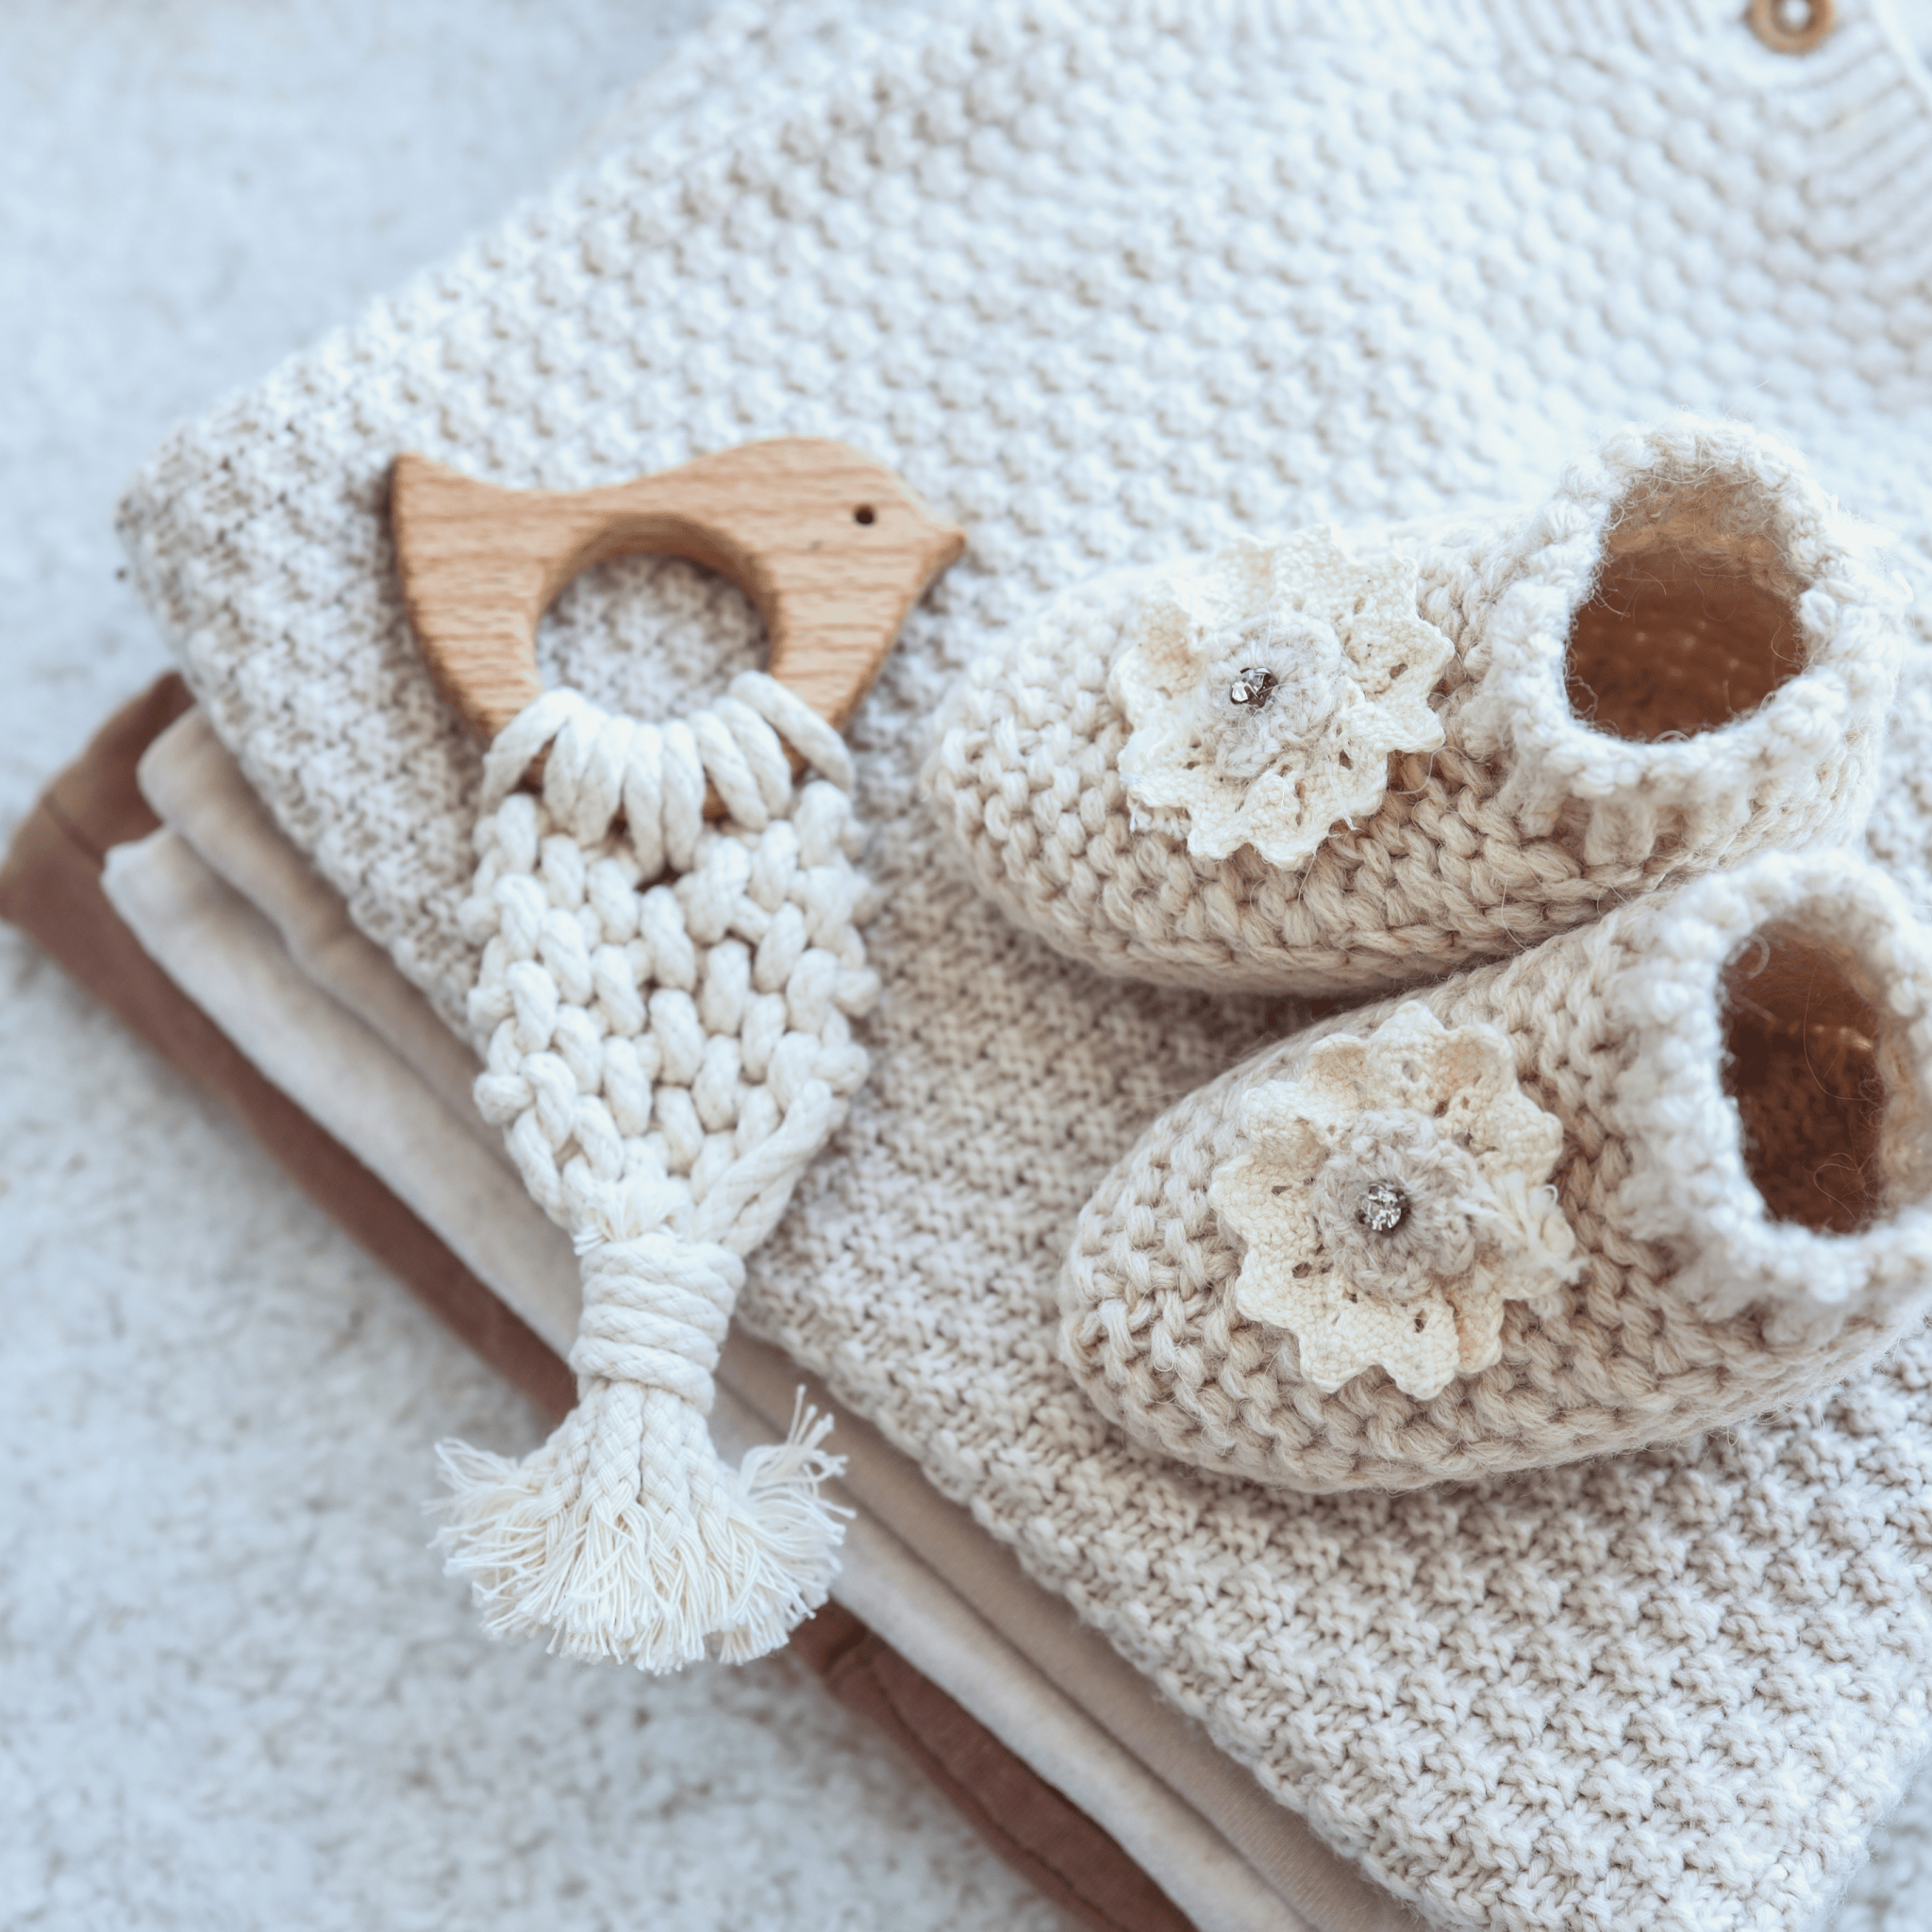 [6-Month-Prepaid] Hooks & Needles Subscription Box #20 with floral details on a pile of soft blankets next to a wooden bird-shaped teether.